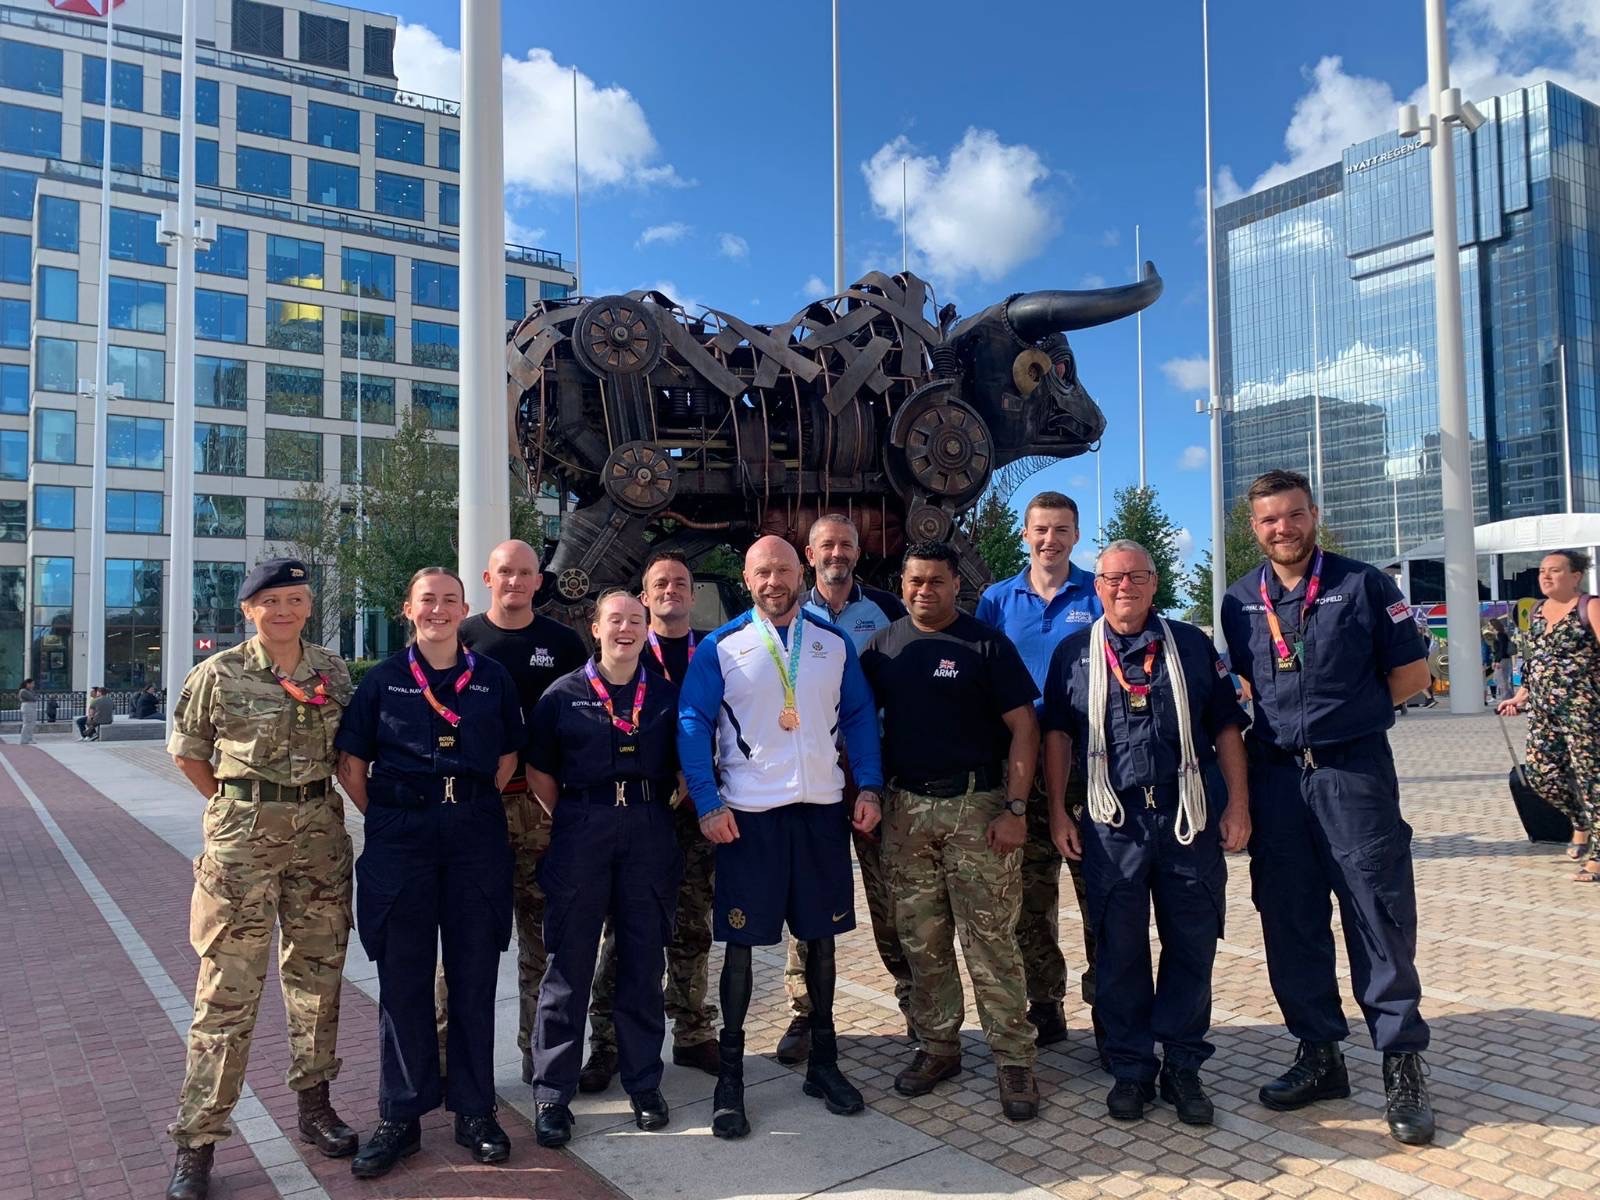 Image shows Armed Forces posing for photo by a Bull statue in Birmingham.